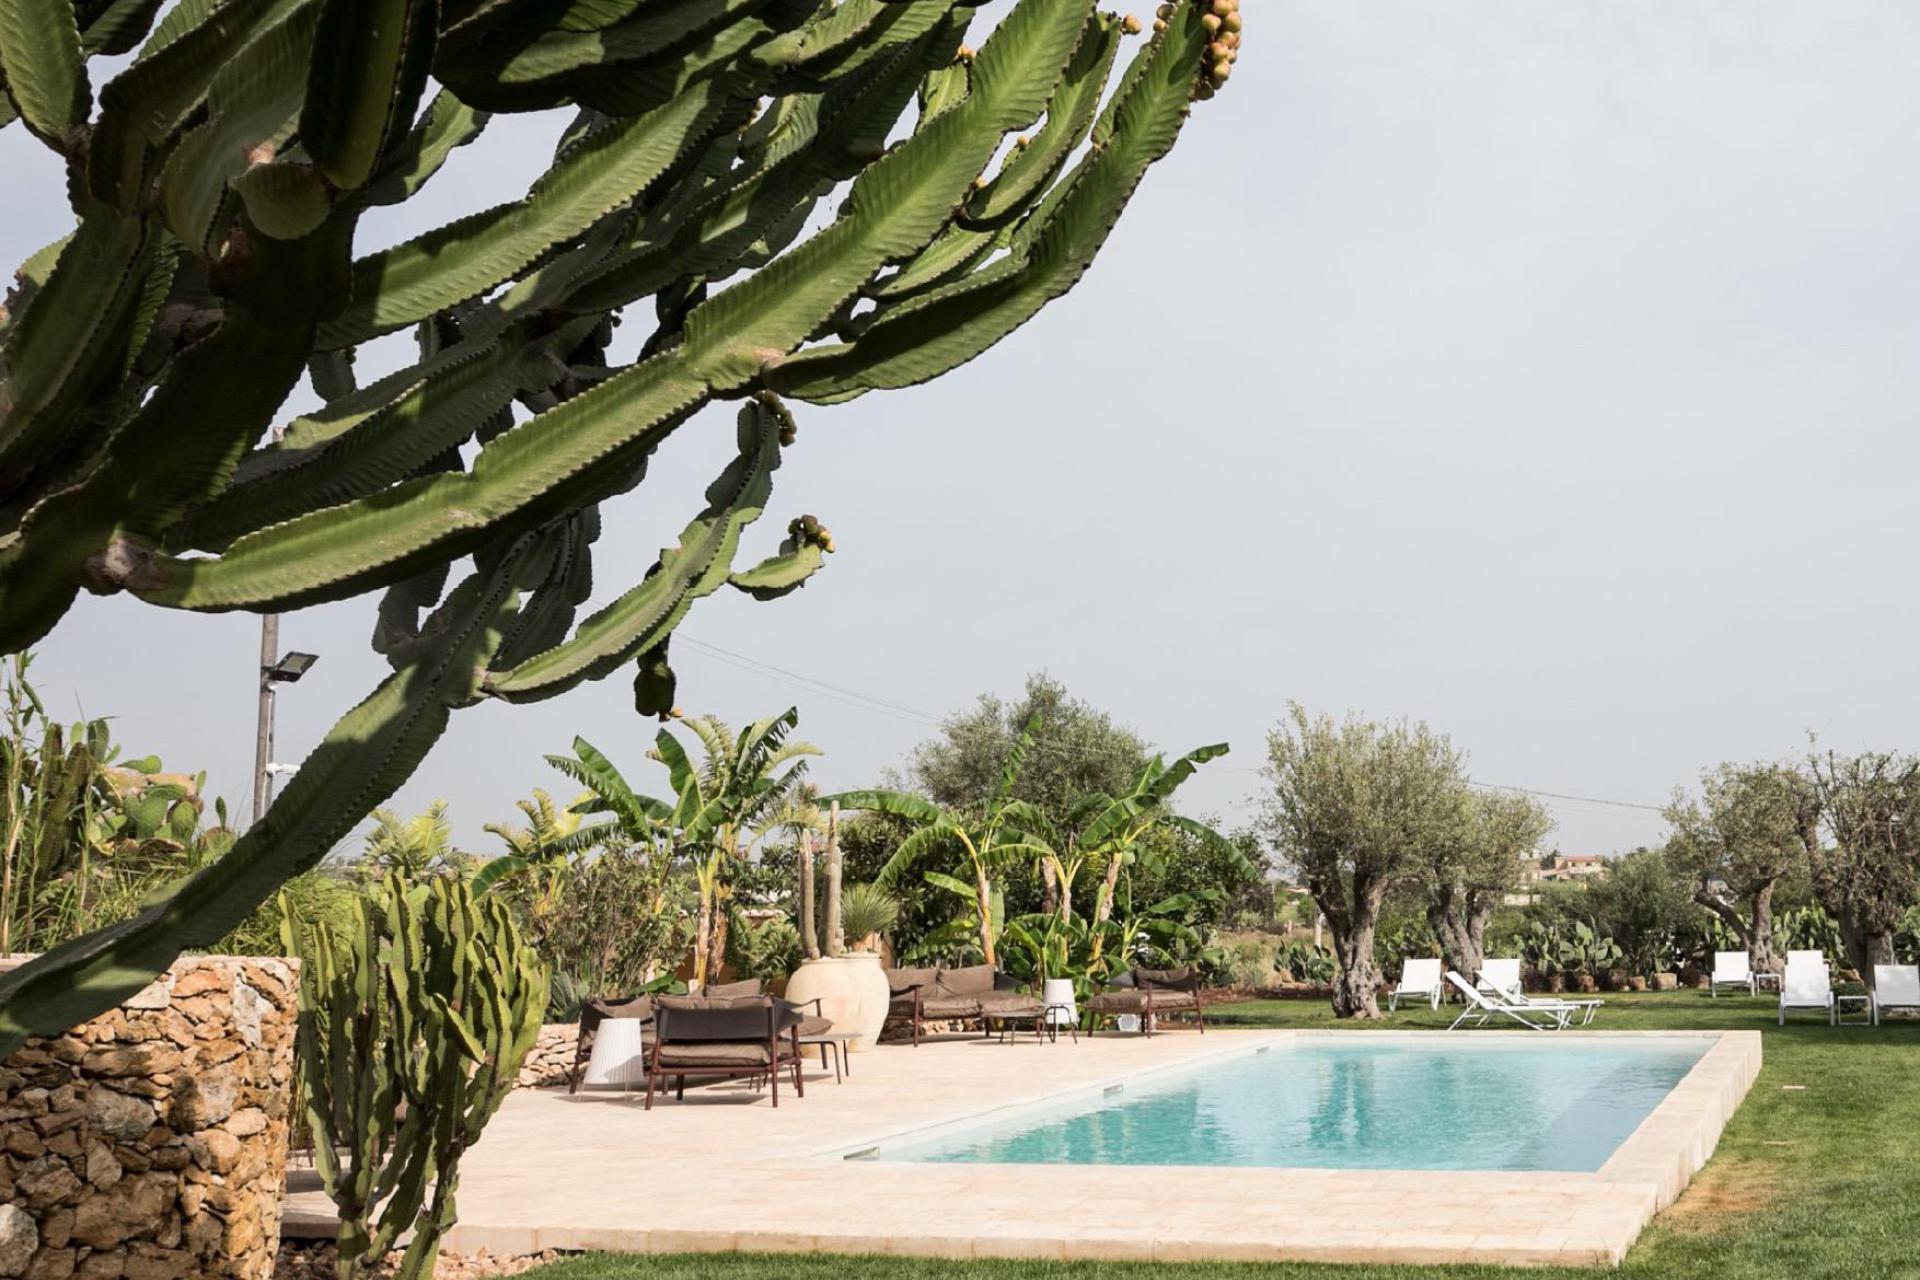 Agriturismo Sicily Authentic agriturismo near the sea with a romantic courtyard